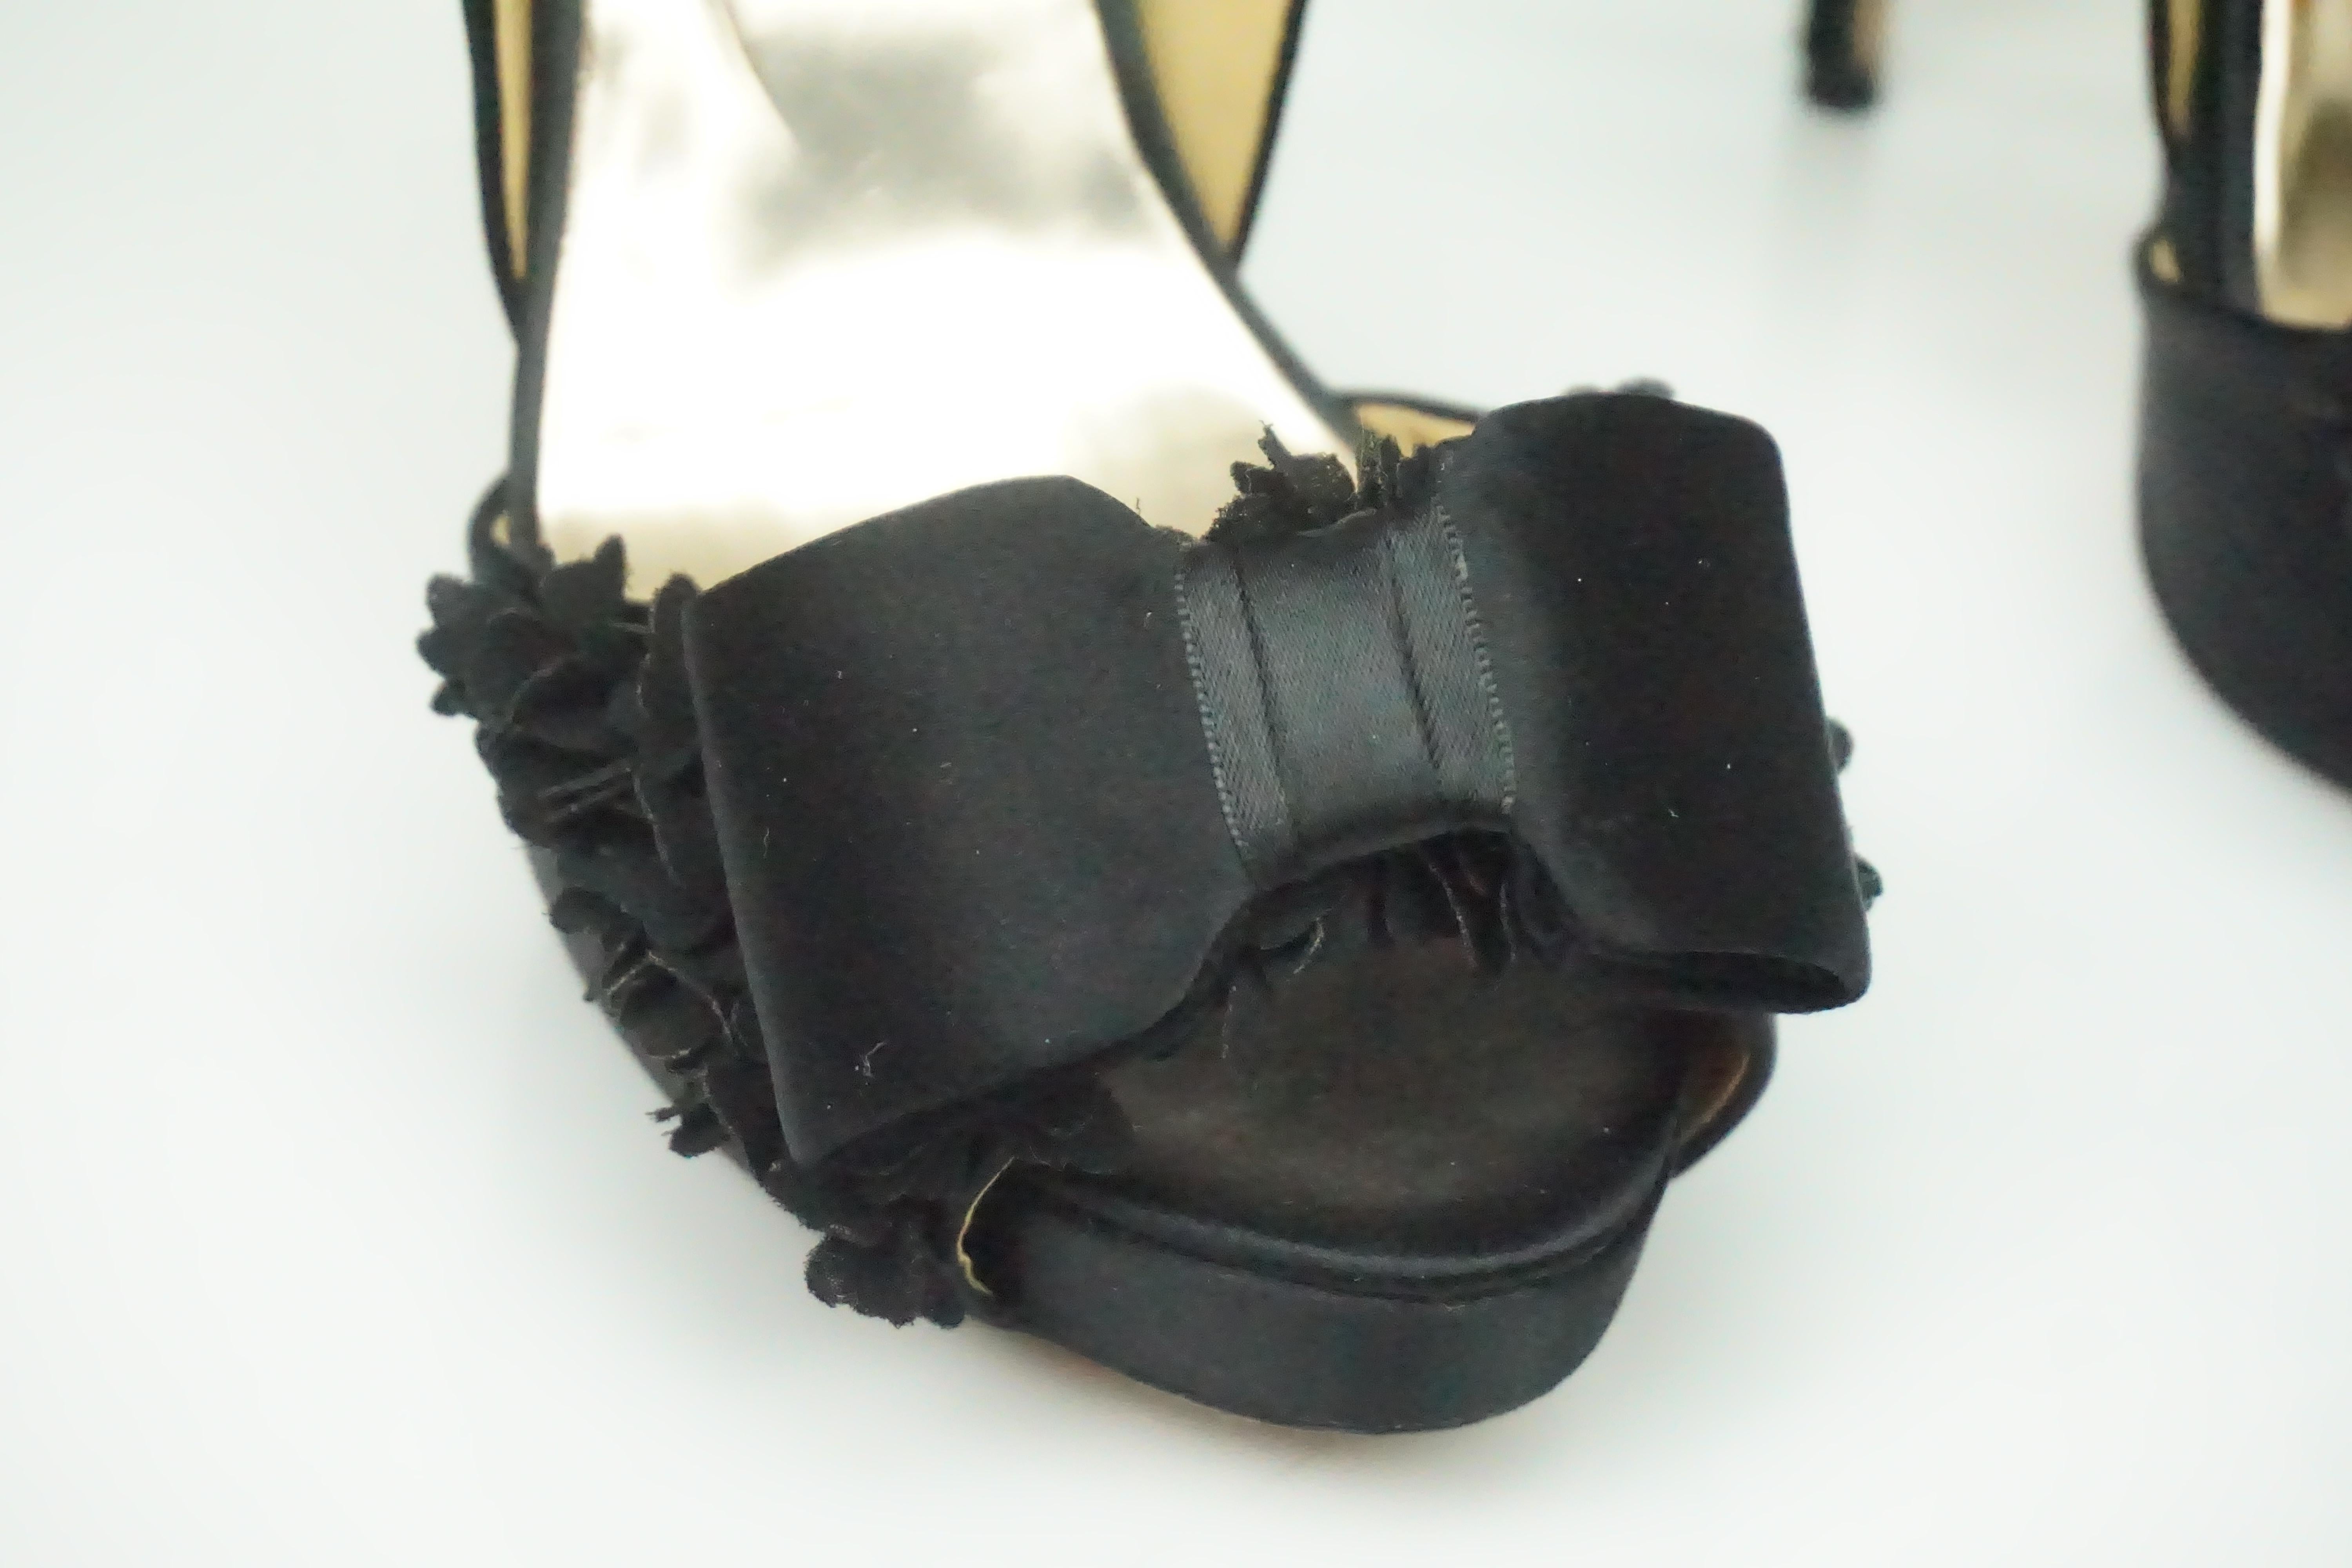  Badgley Mischka Black Satin Pump w/ Floral and Bow Detailing In Good Condition In West Palm Beach, FL